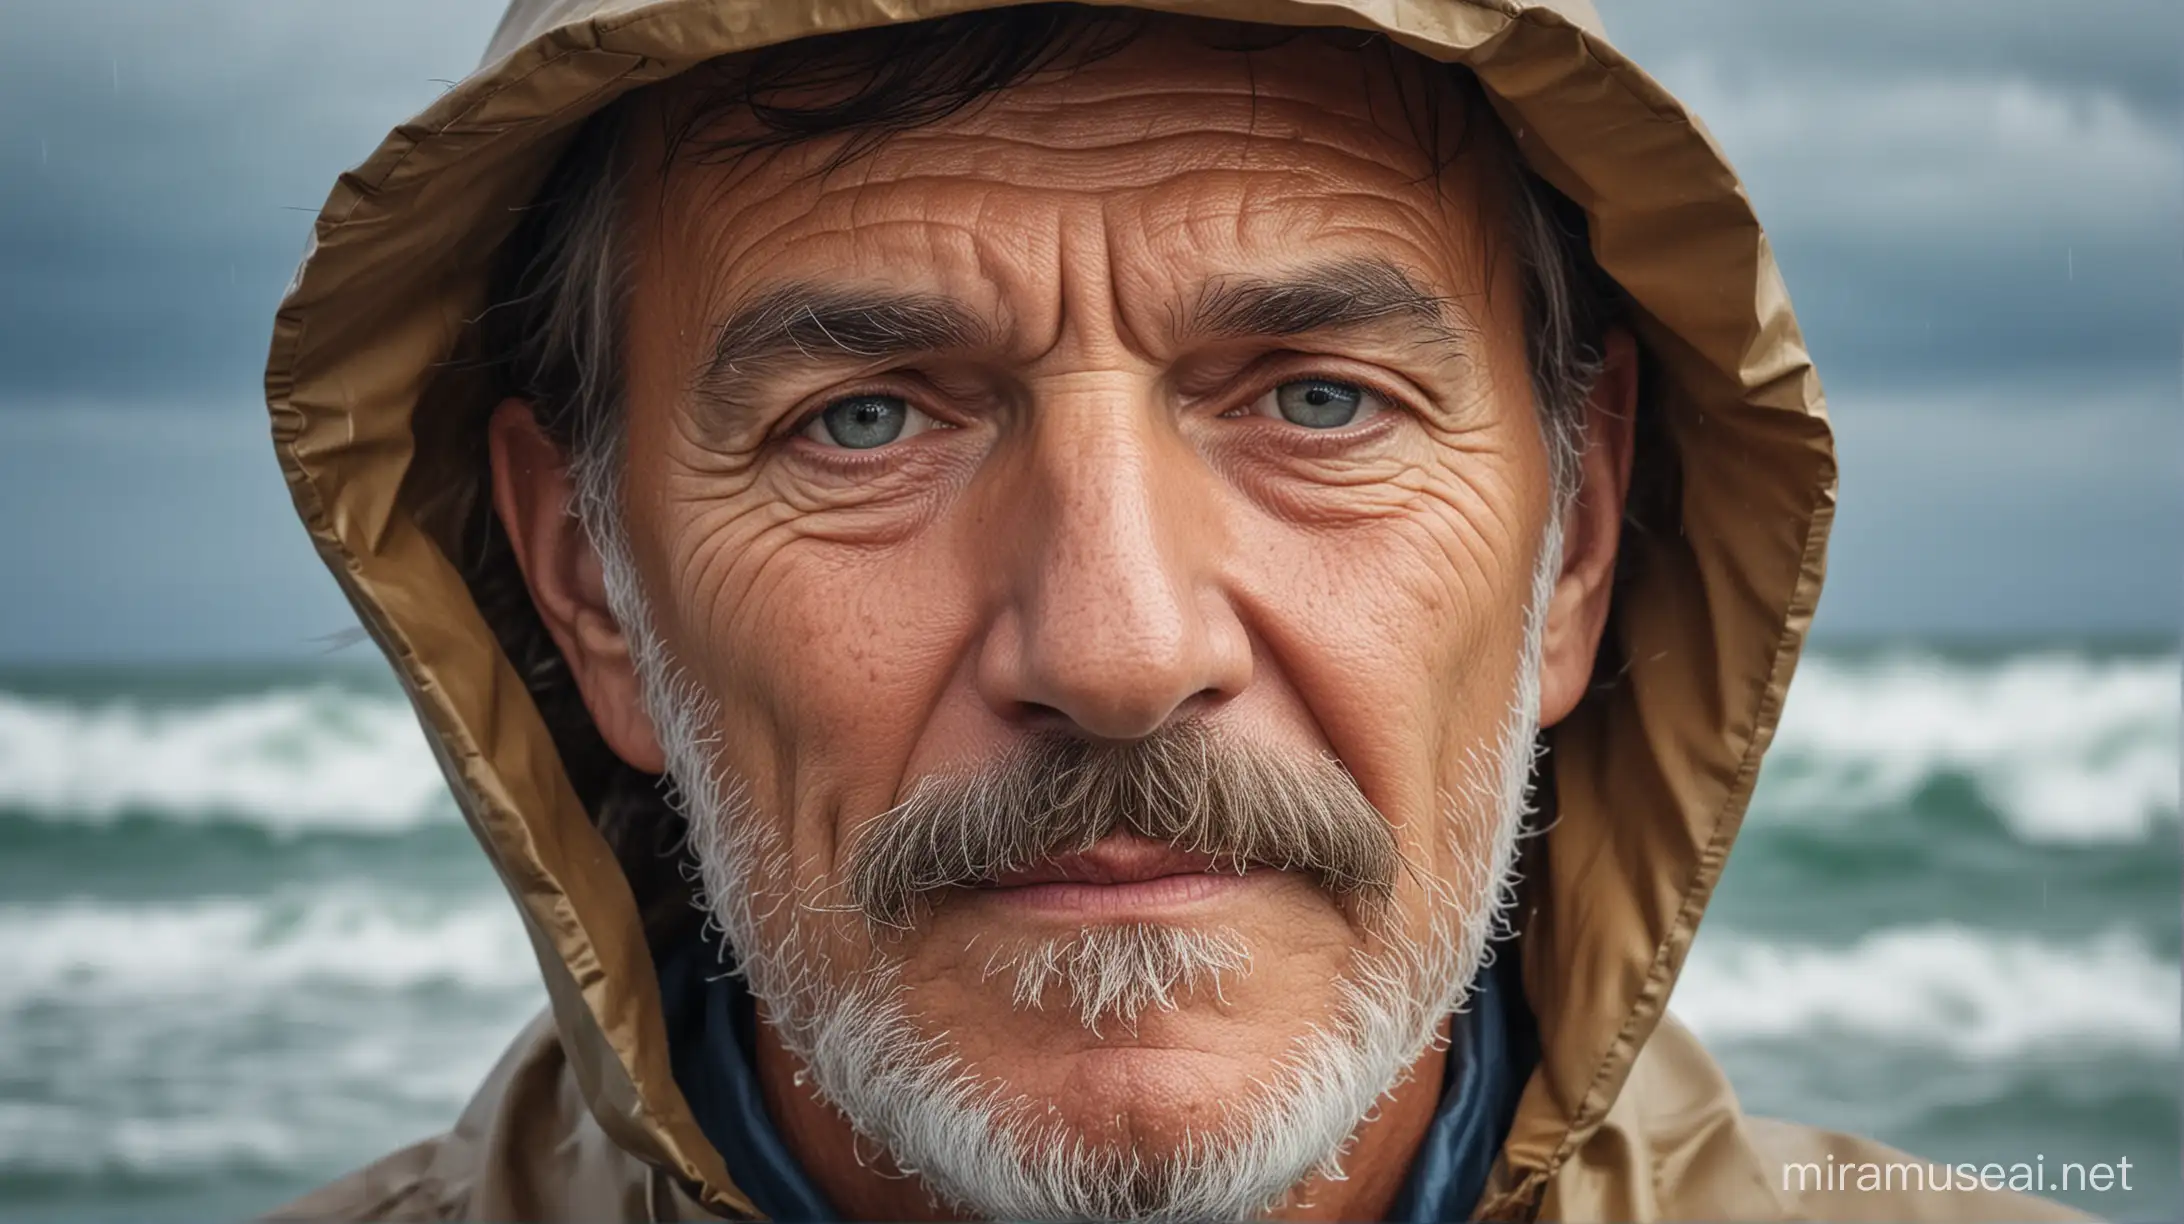 Rugged Fishermans Profile Amidst Stormy Sea and Clouds